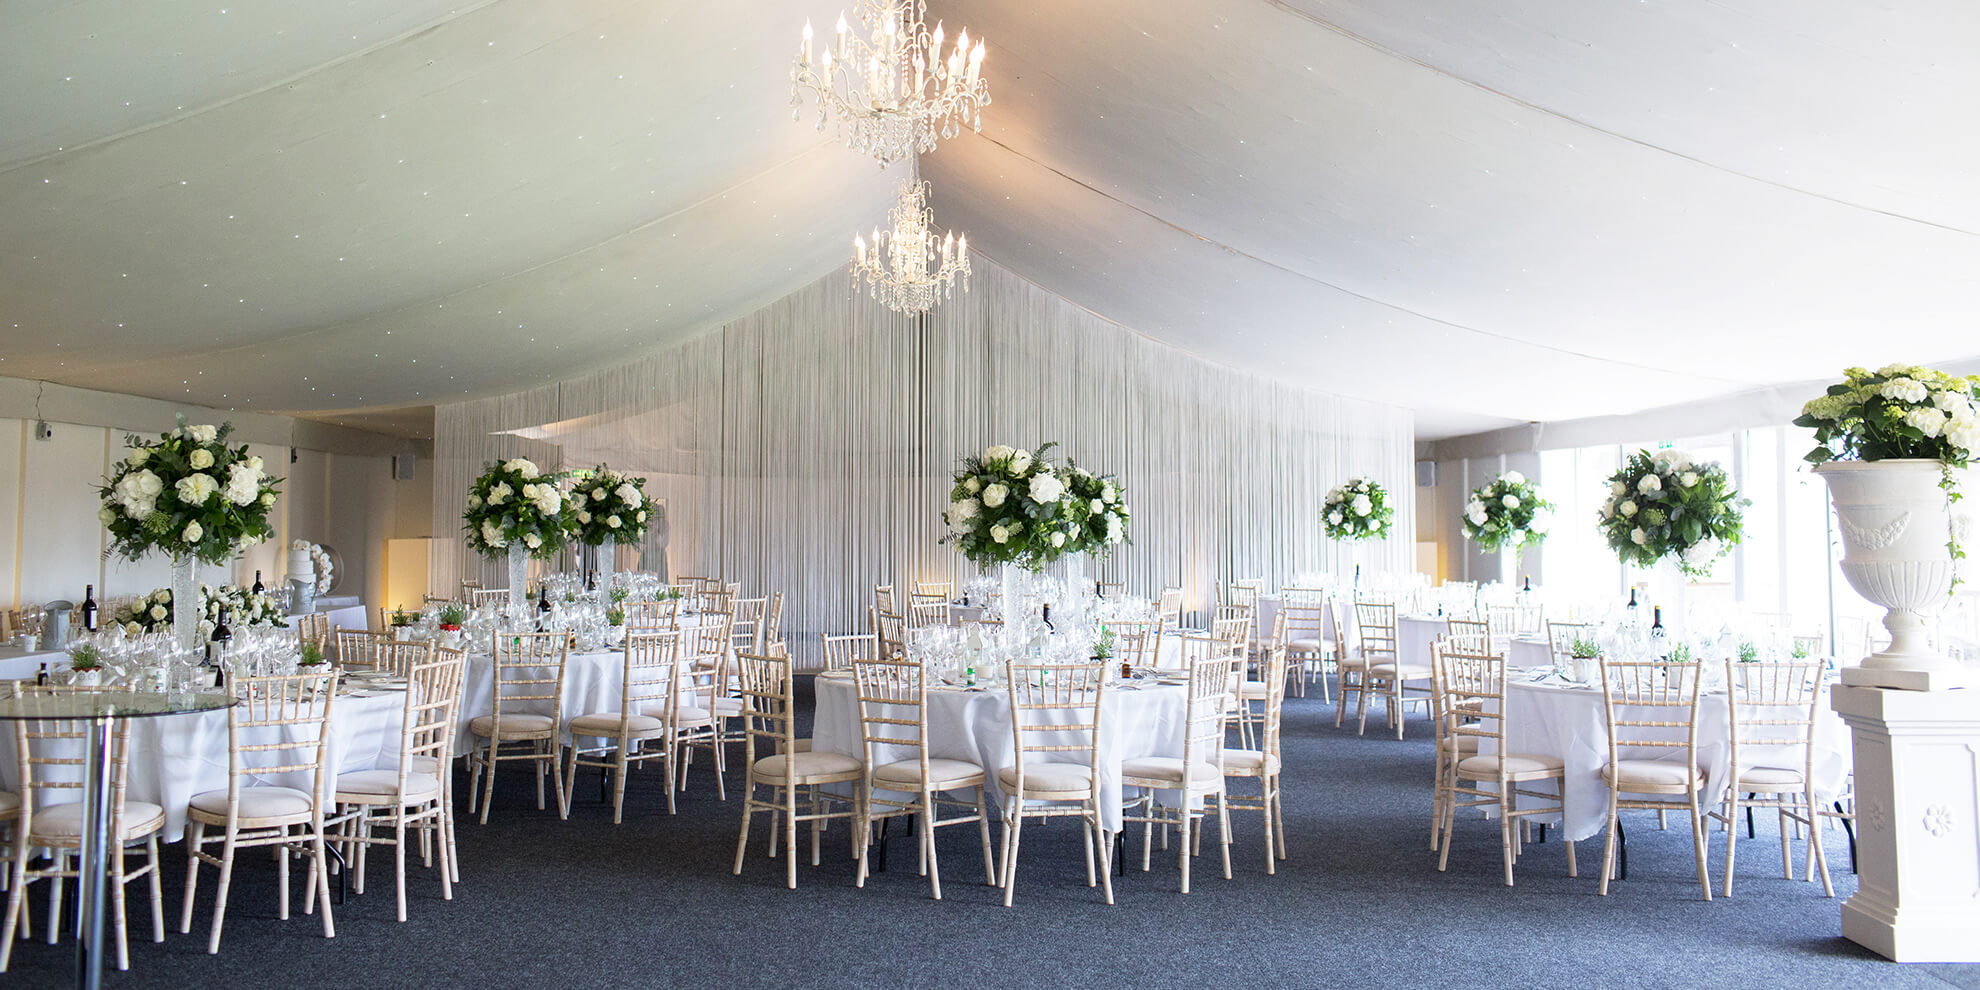 The Pavillion at Combermere Abbey is set up for a stunning white and greenery filled wedding reception